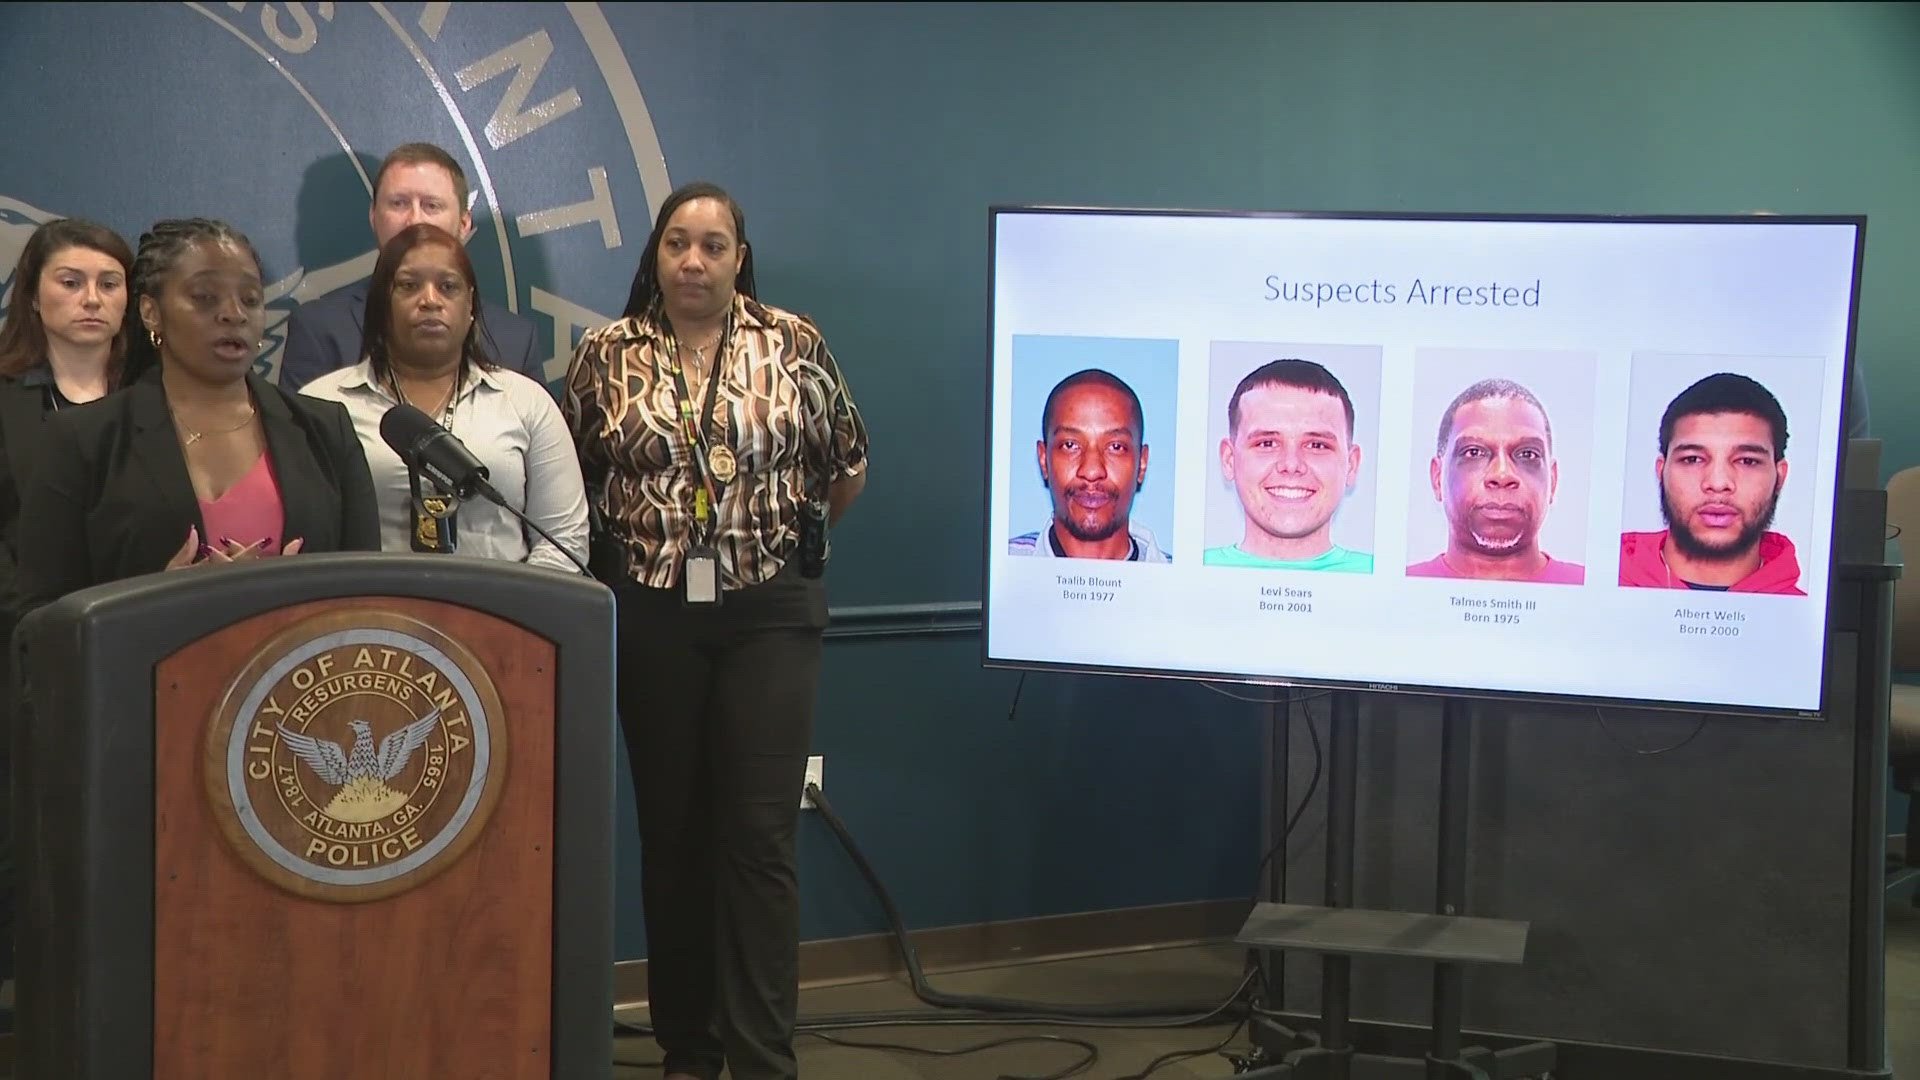 The Atlanta Police Department on Friday announced that they had arrested four men in a trafficking investigation involving four young local victims.